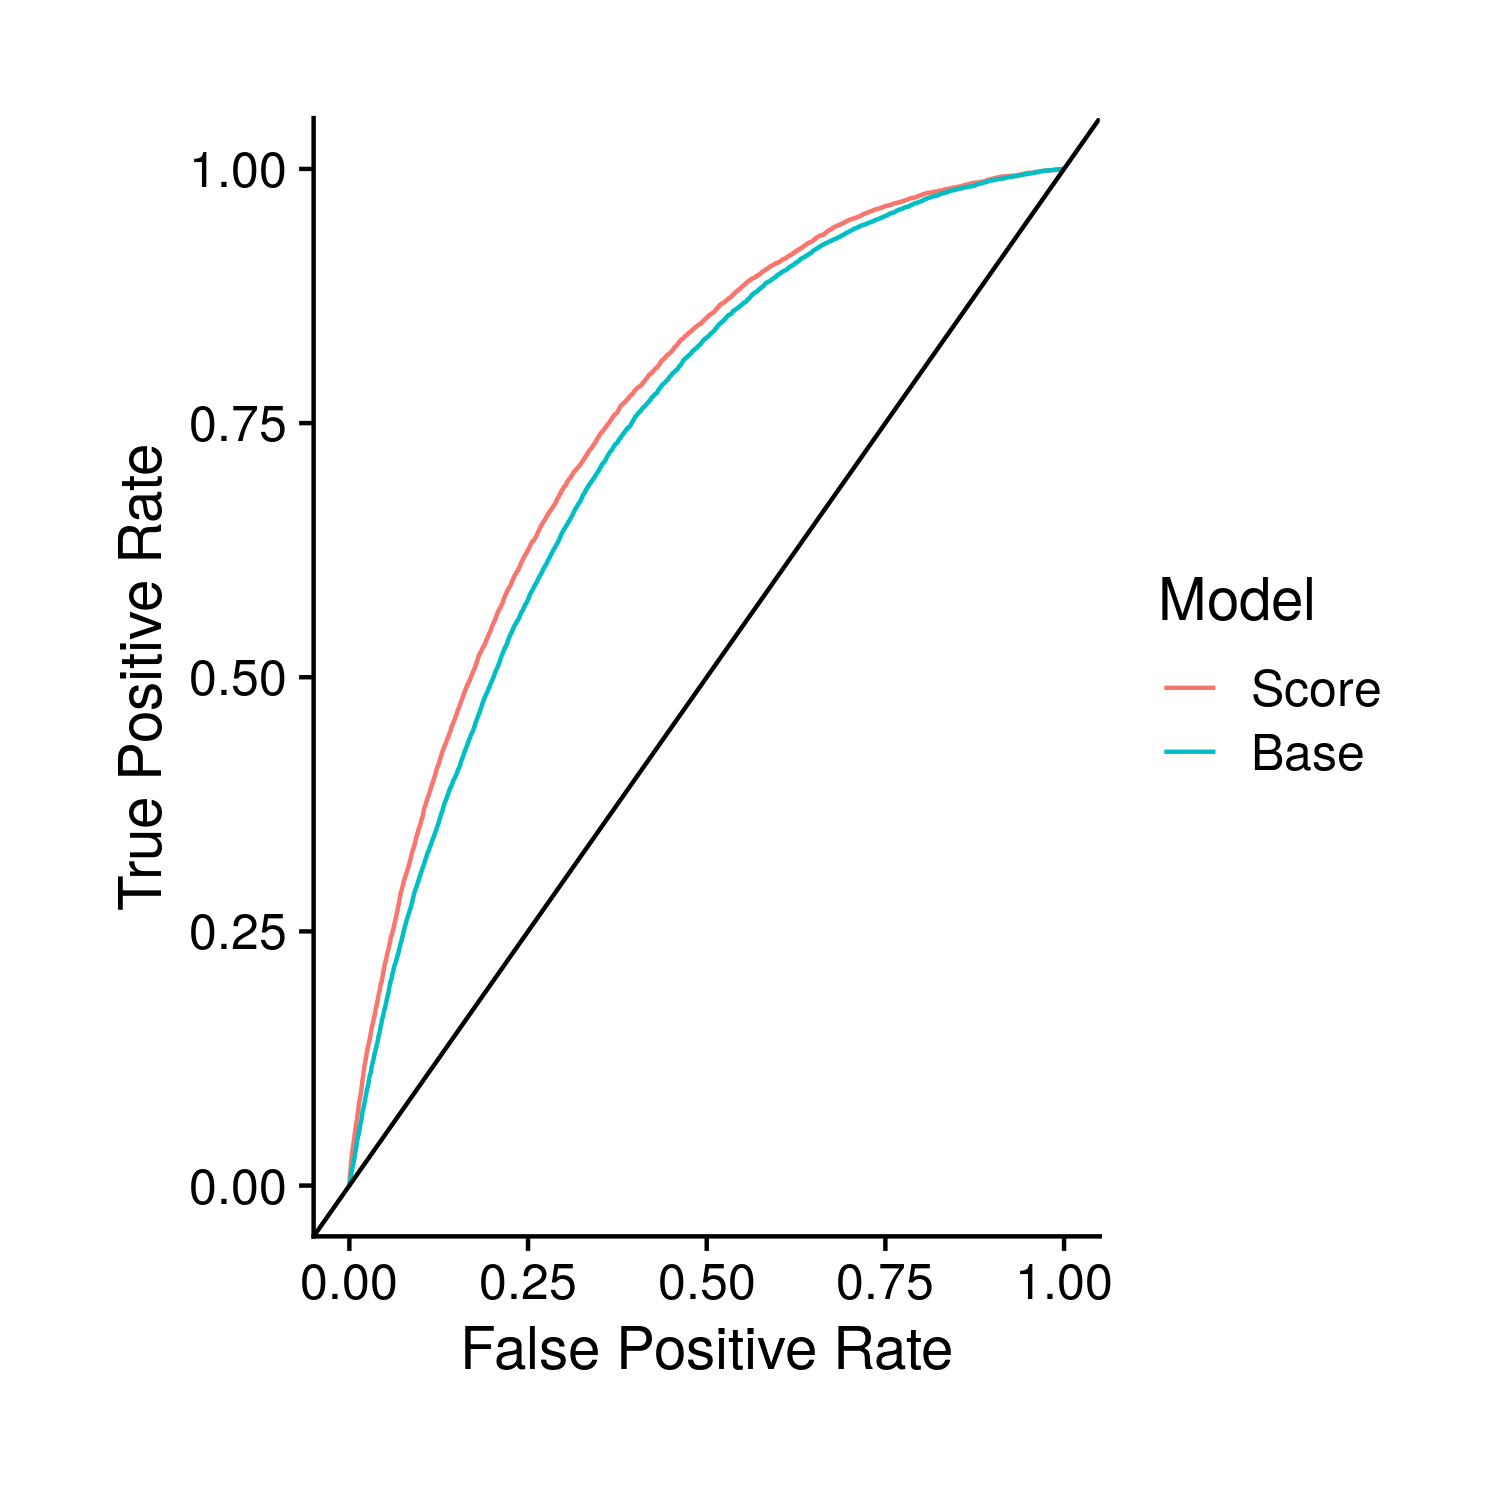 Comparison of the base and polygenic risk score included models through their ROC curves